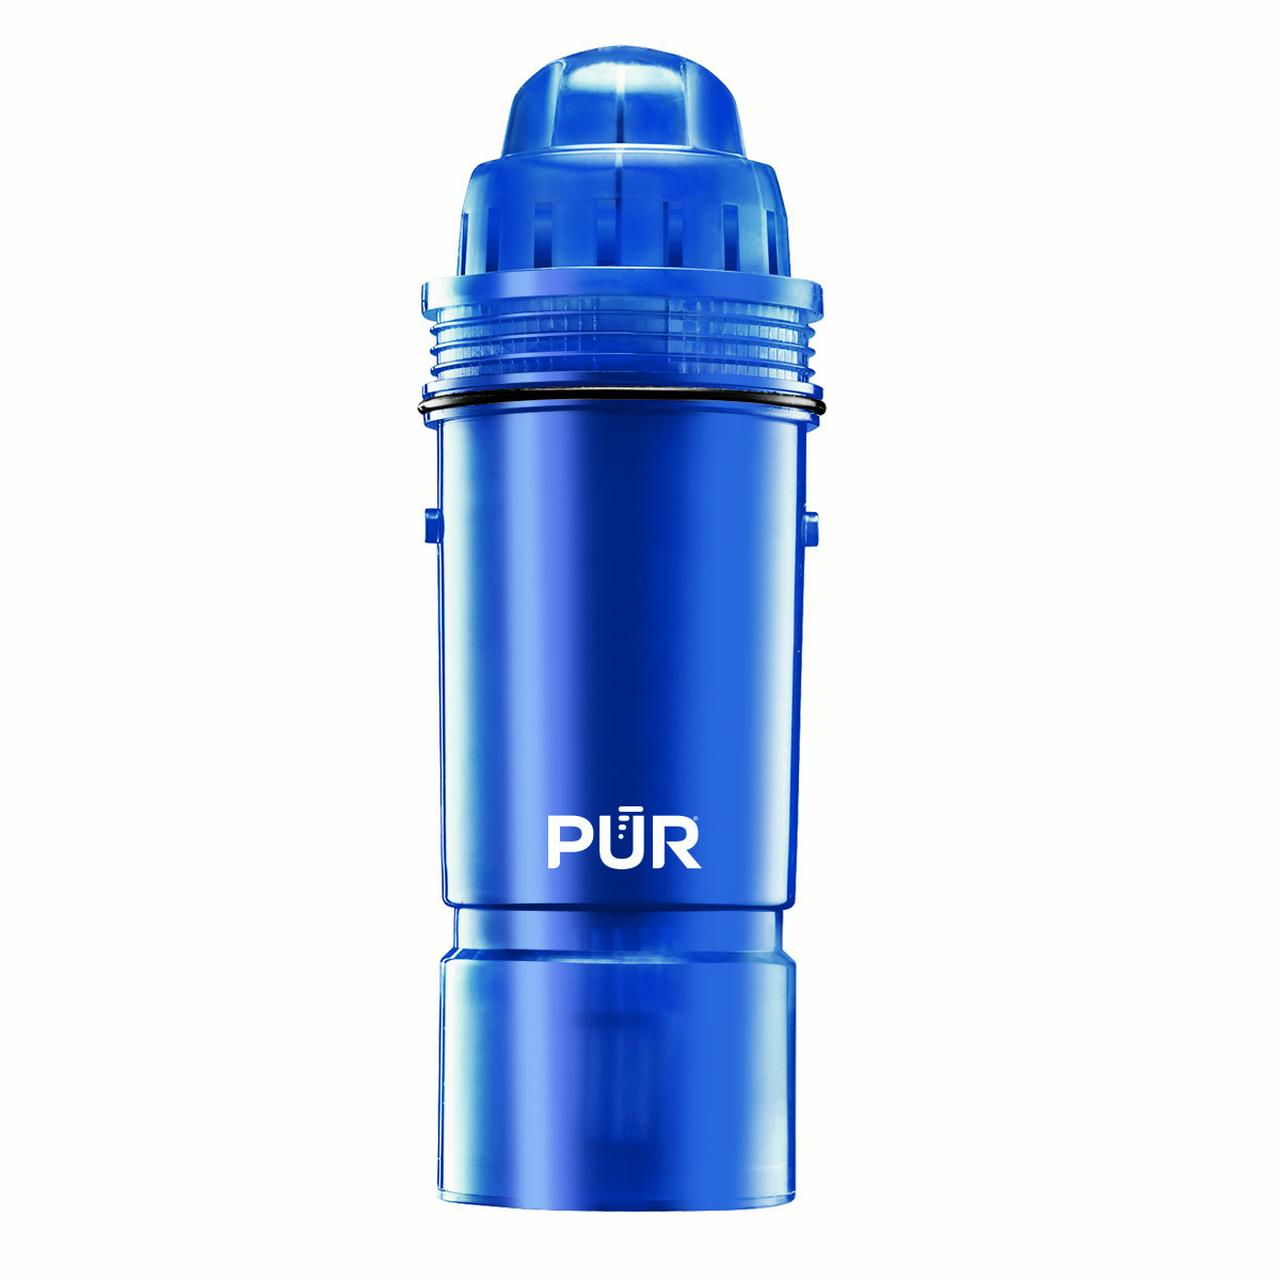 PUR Pitcher Replacement Water Filter, 3-Pack, CRF950Z3 - image 1 of 2